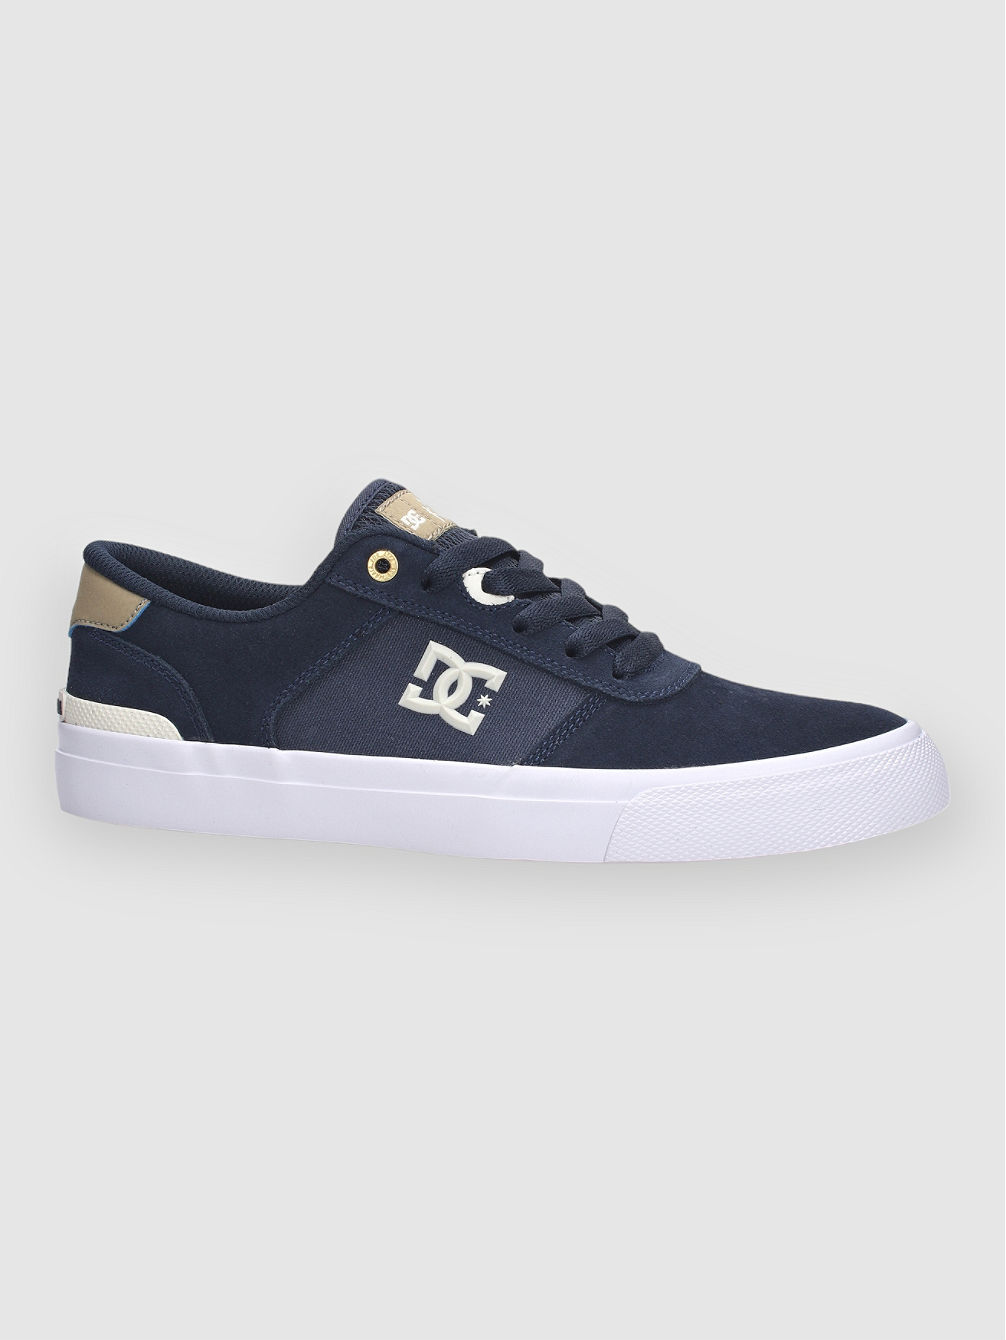 Teknic S Wes Skate Shoes